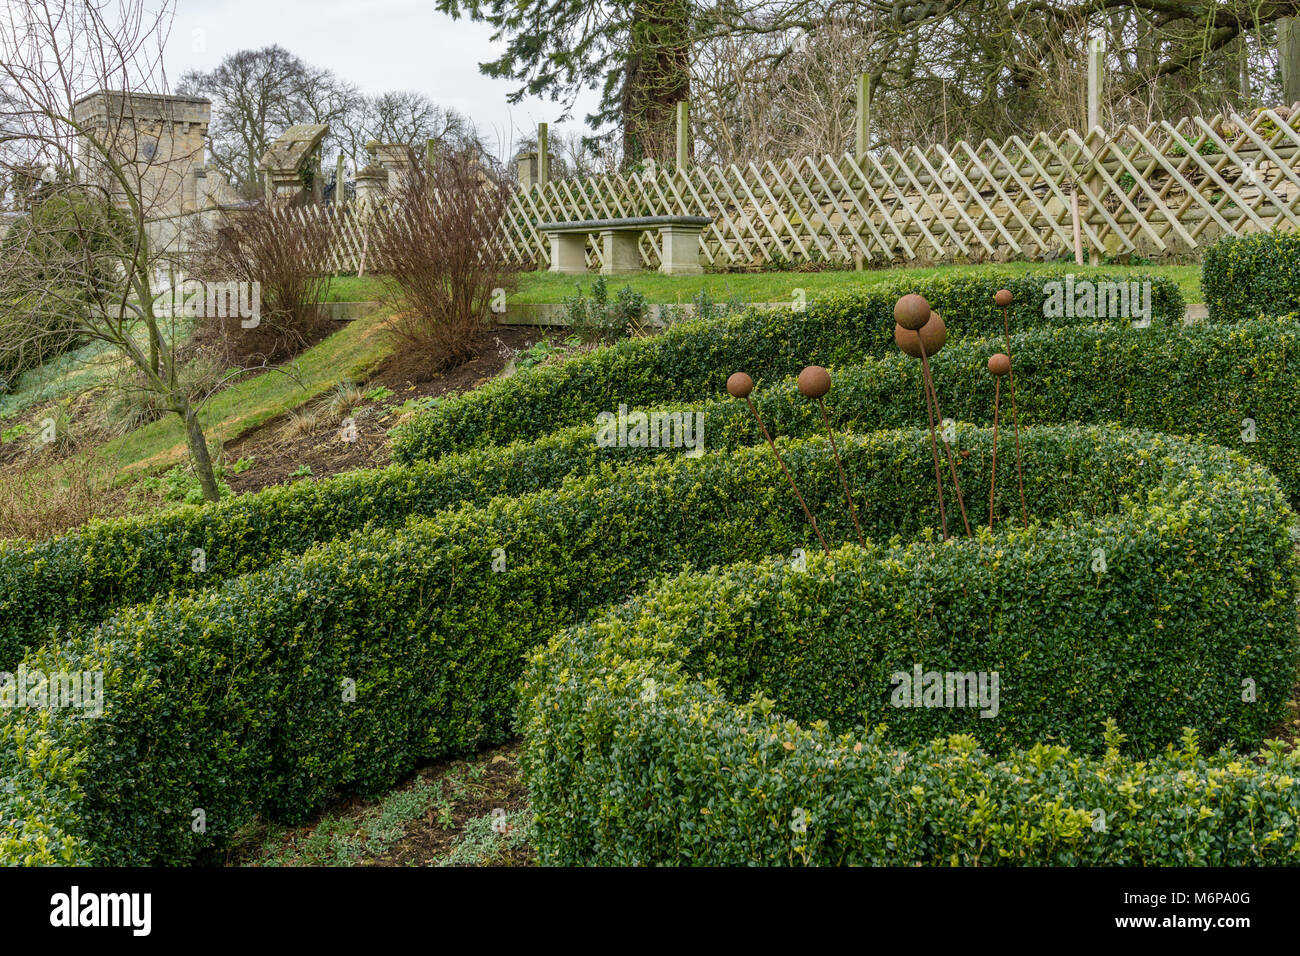 Common Box hedge grown in a curved shape, wooden trellis in the background; Easton Walled Gardens, Lincolnshire. Stock Photo